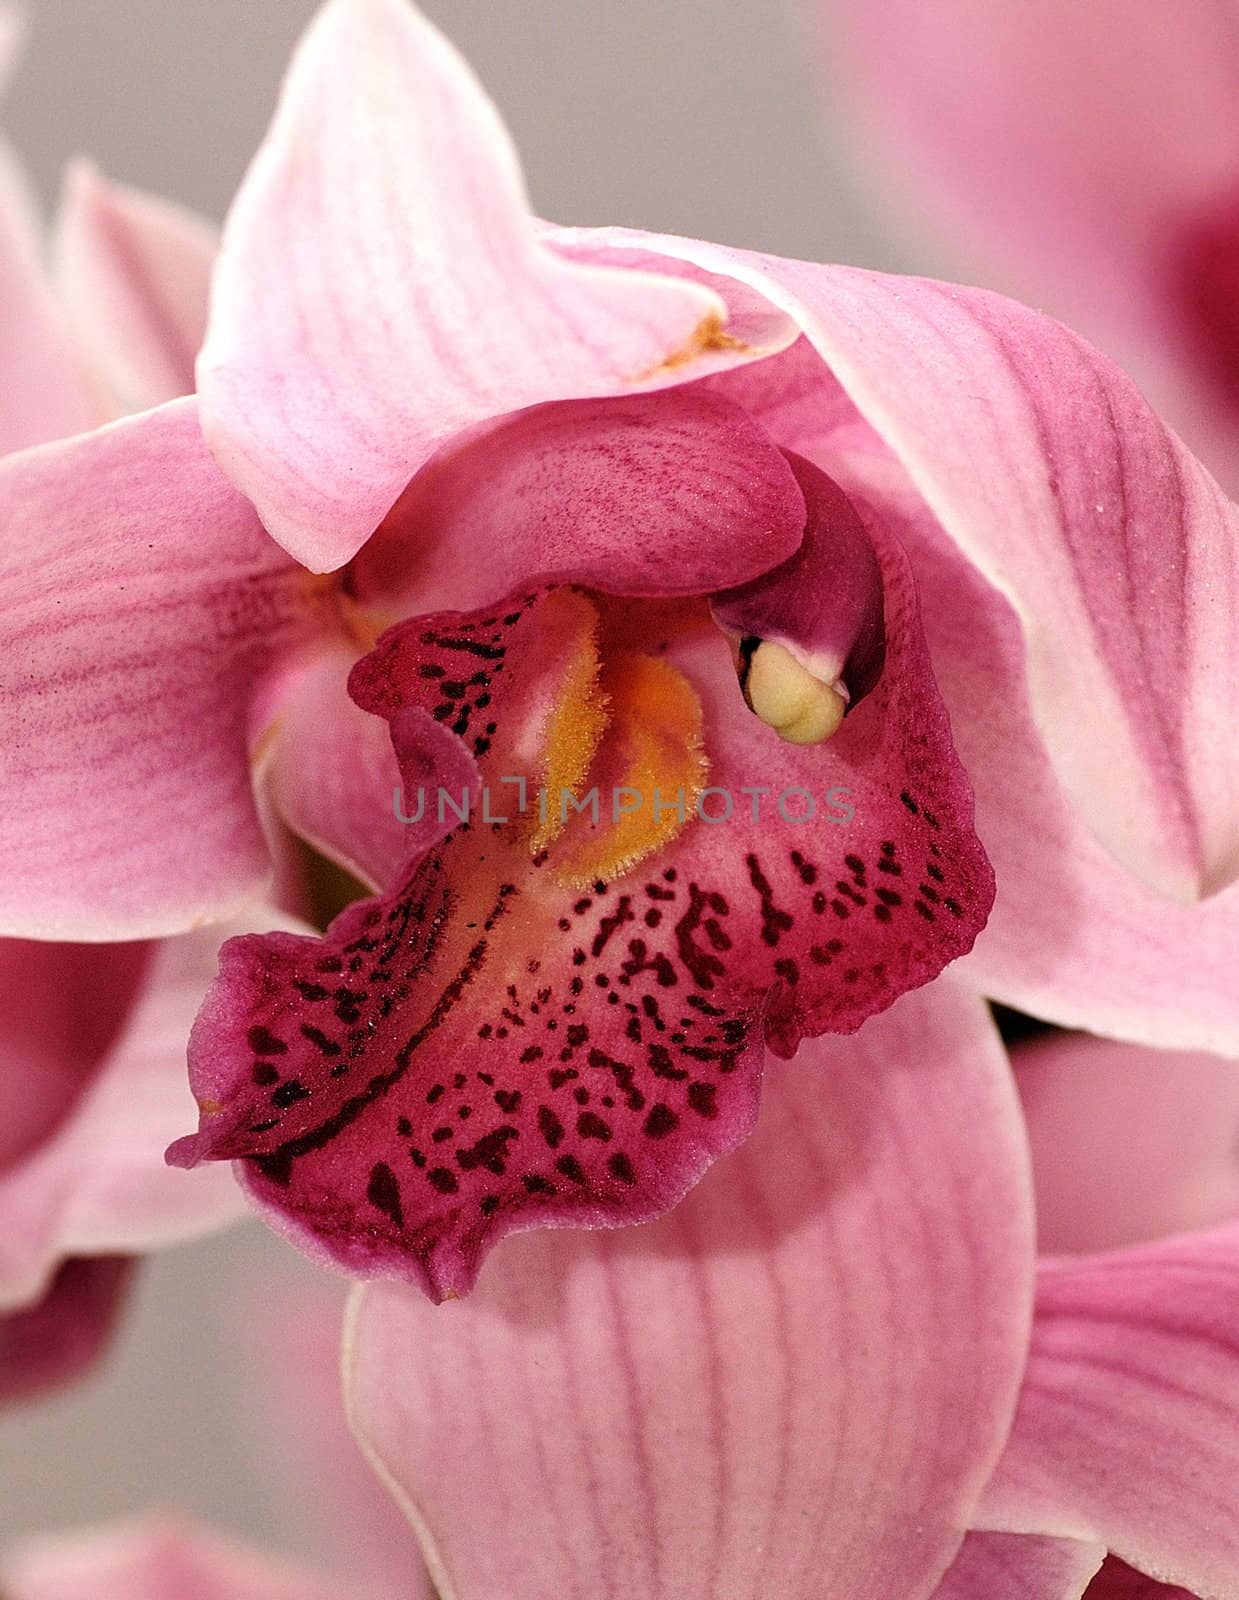 Pink Orchid by pazham